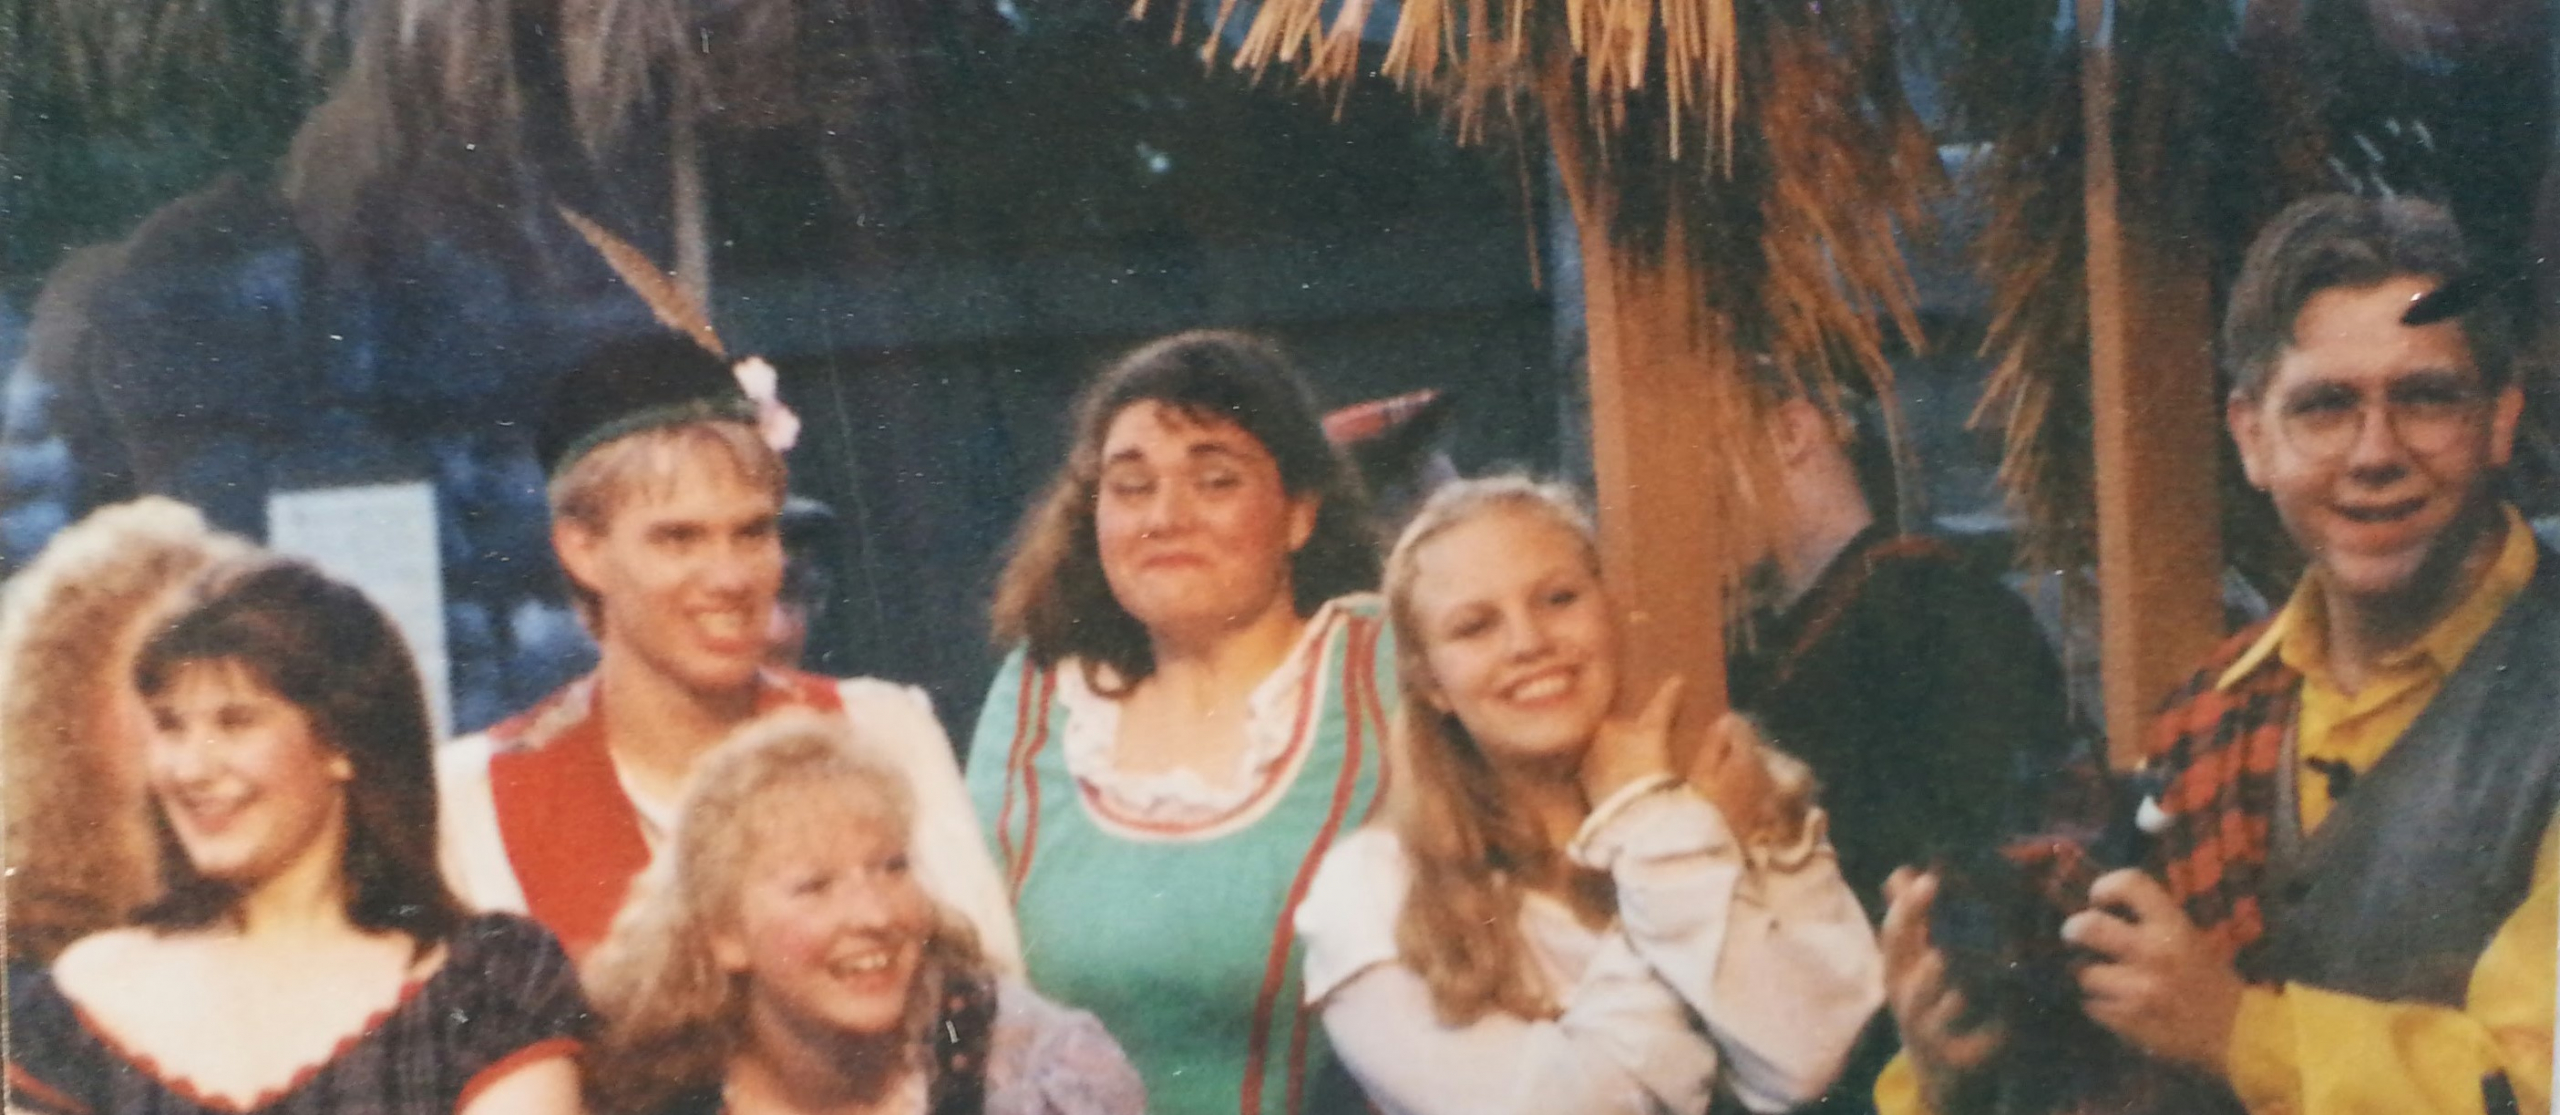 teenager Jason Grueneich in constume on stage, smiling and laughing with other actors, during a Sleepy Hollow Theatre production in the 1990s